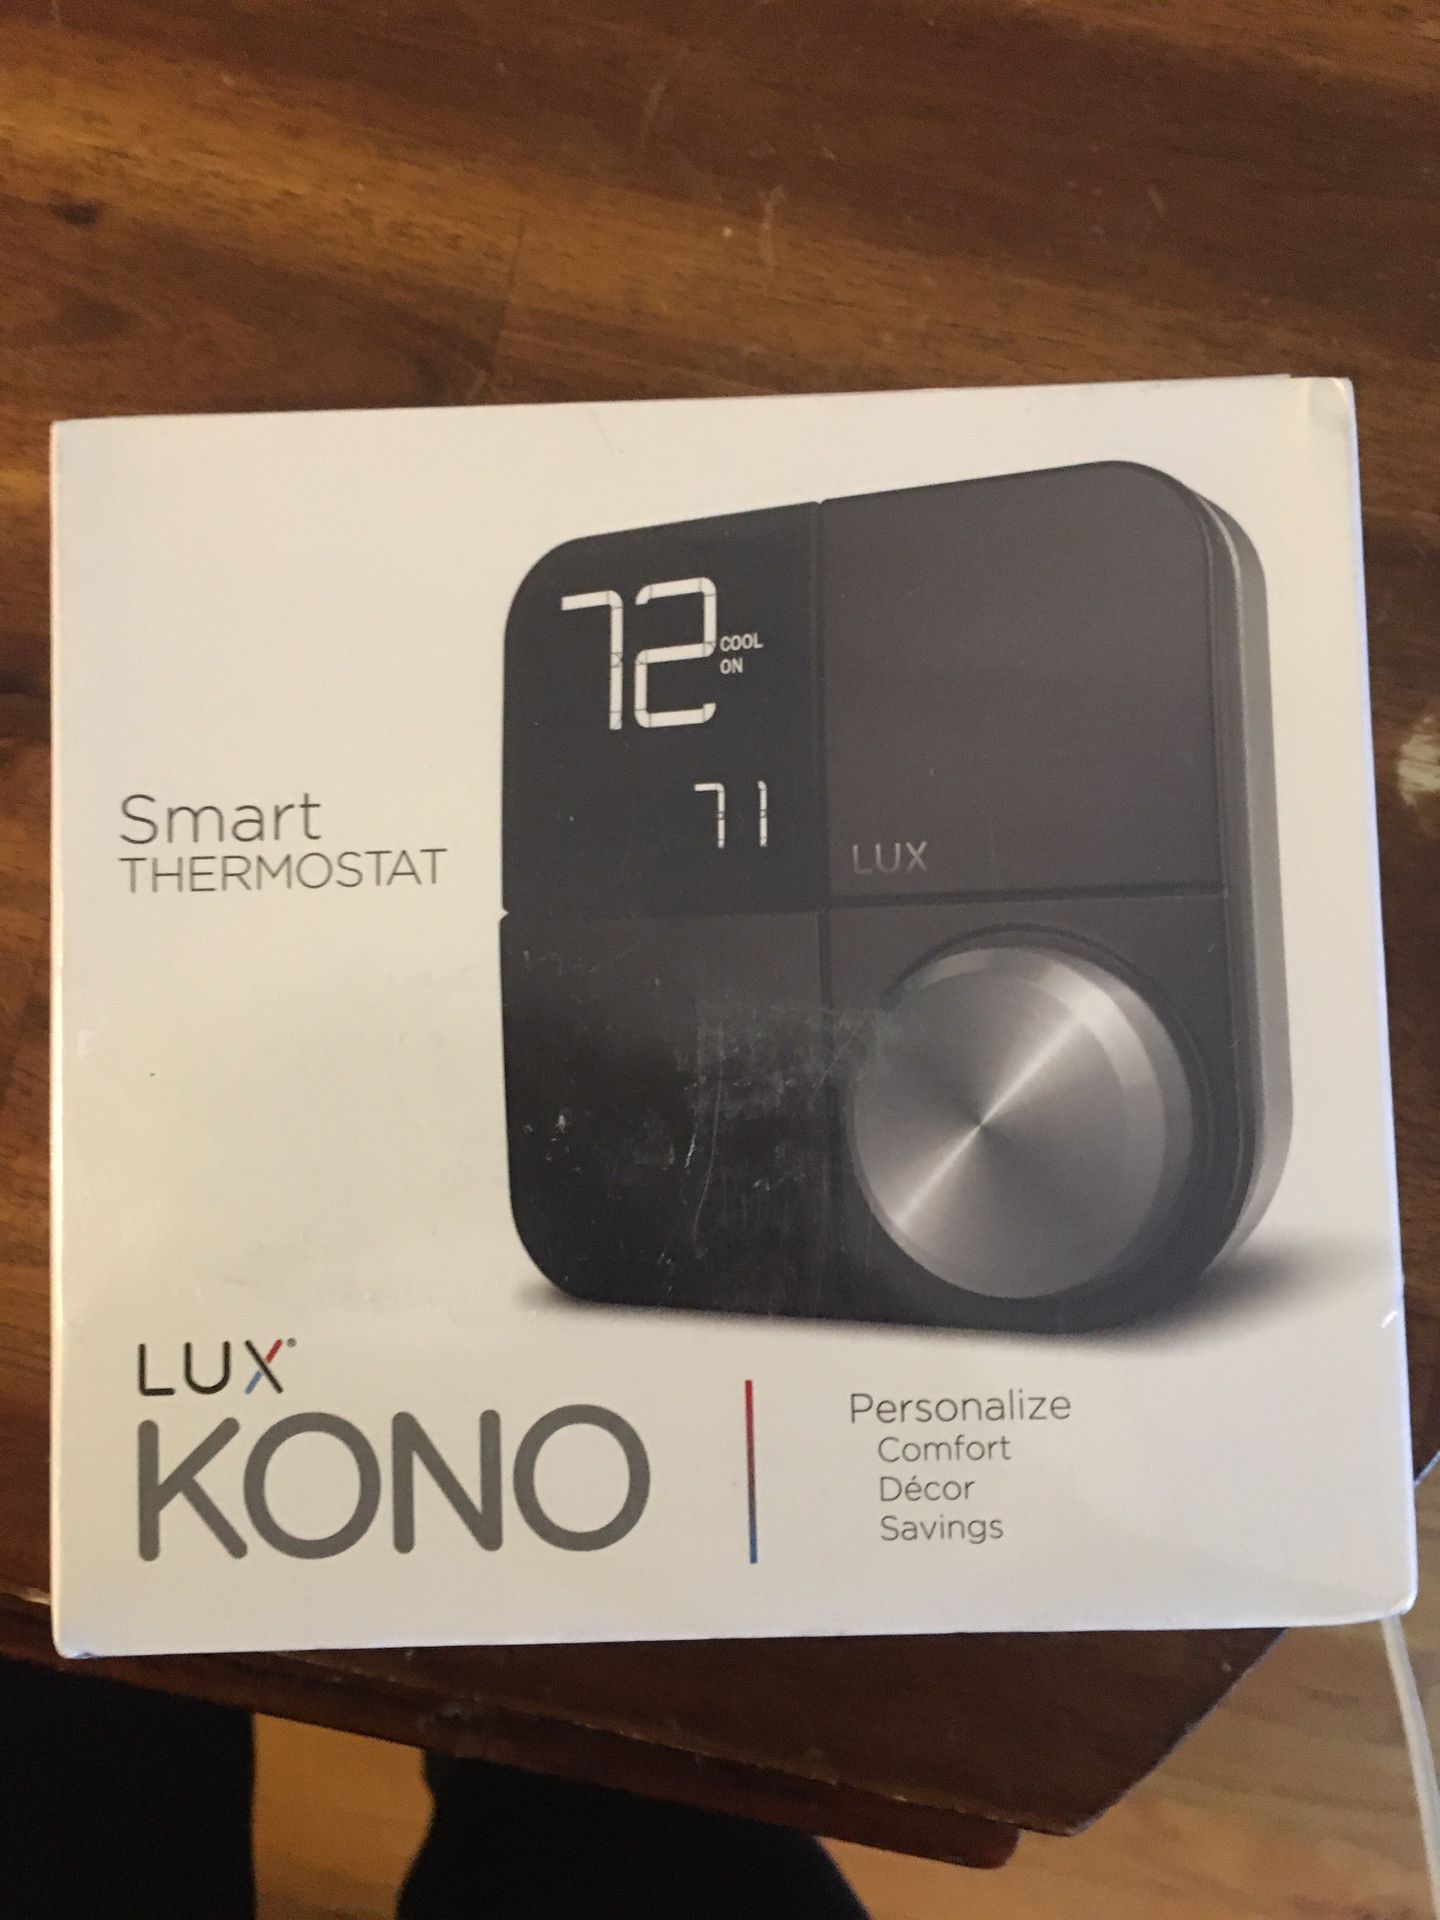 LUX KONO THERMOSTAT (PRICE IS FINAL) no swapping